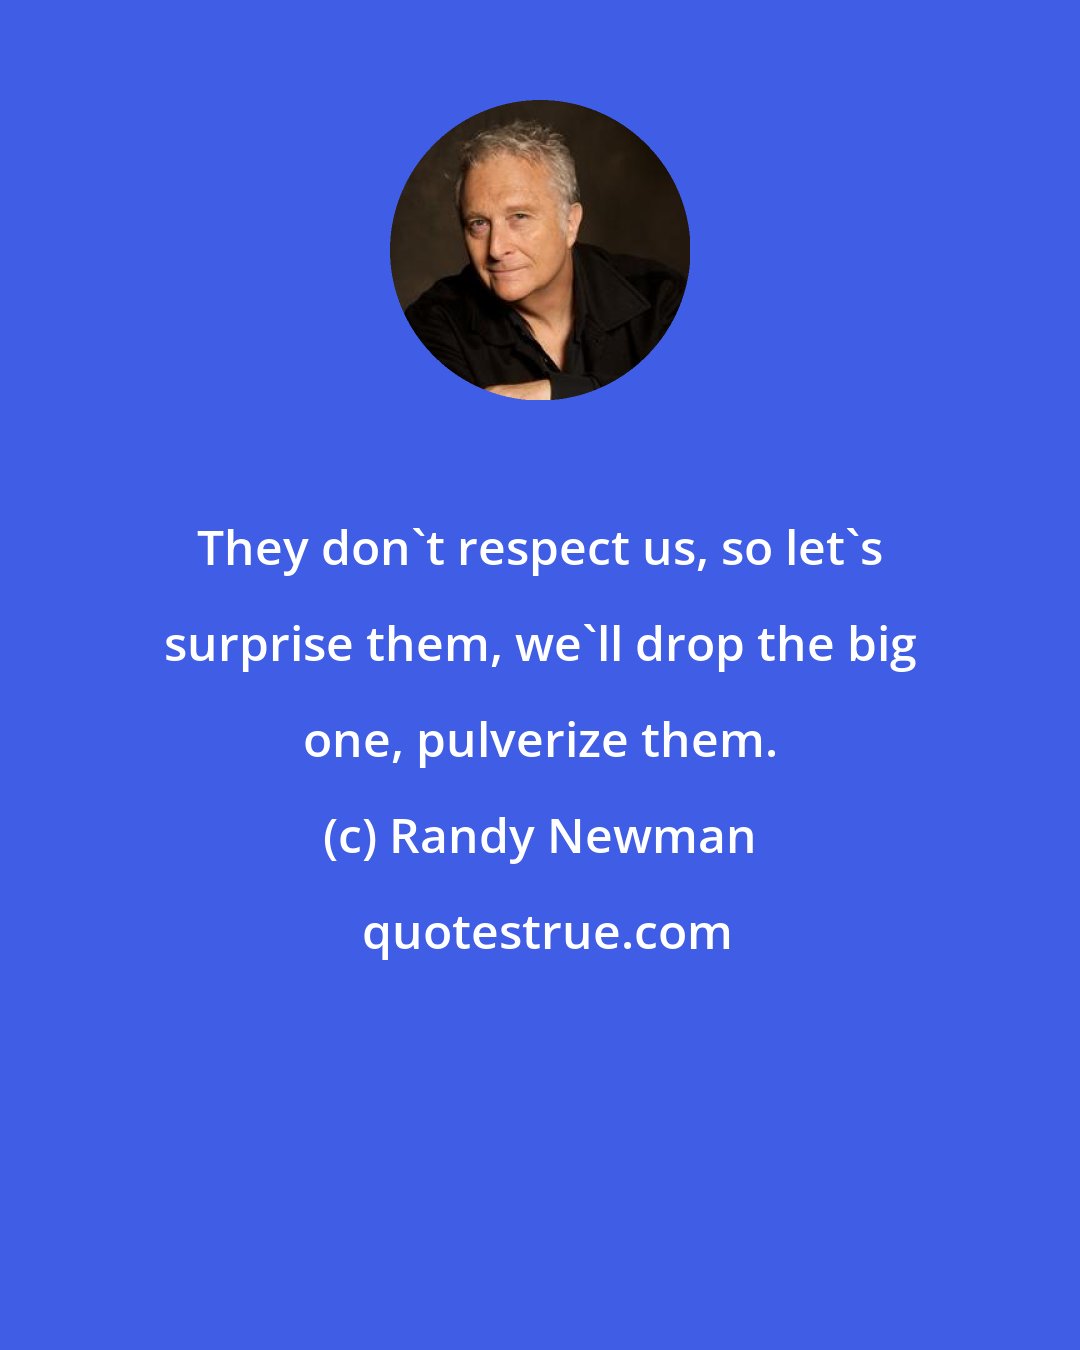 Randy Newman: They don't respect us, so let's surprise them, we'll drop the big one, pulverize them.